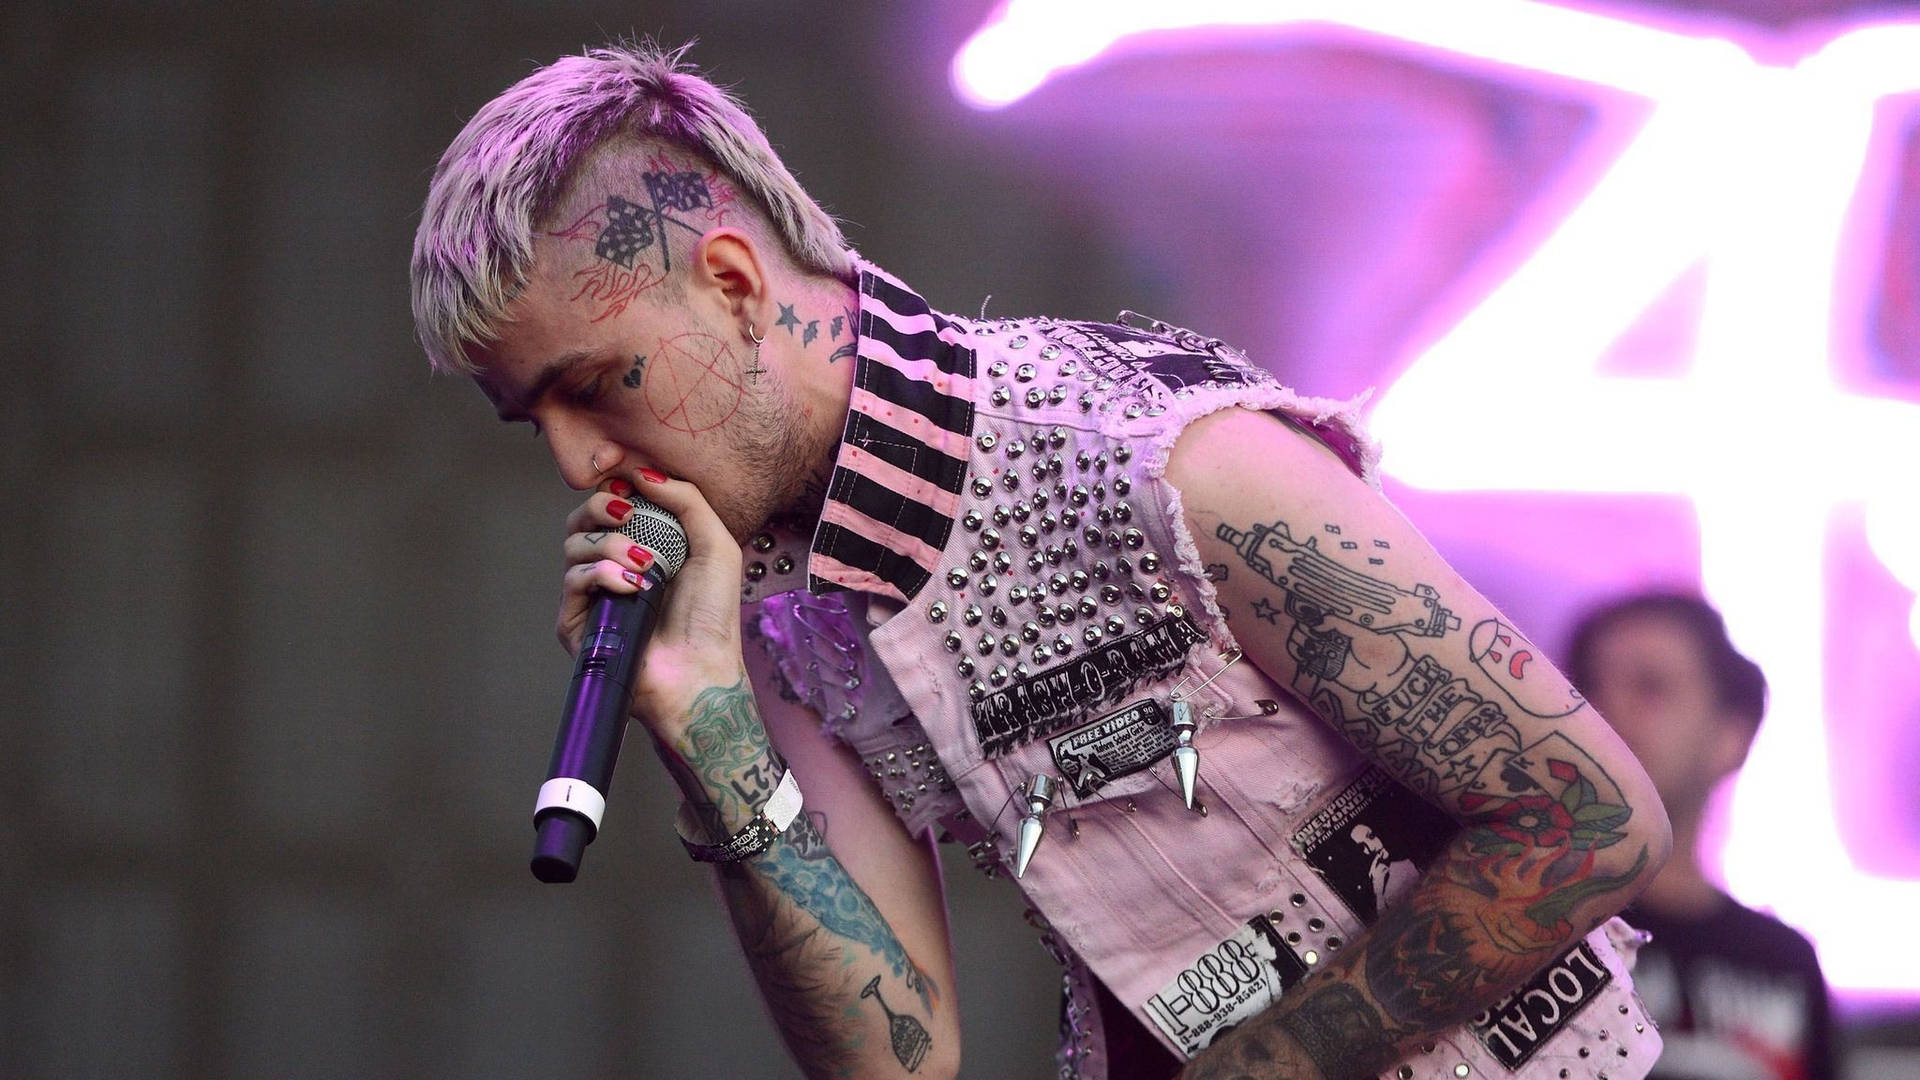 Lil Peep performing live on stage at an emo rock concert Wallpaper